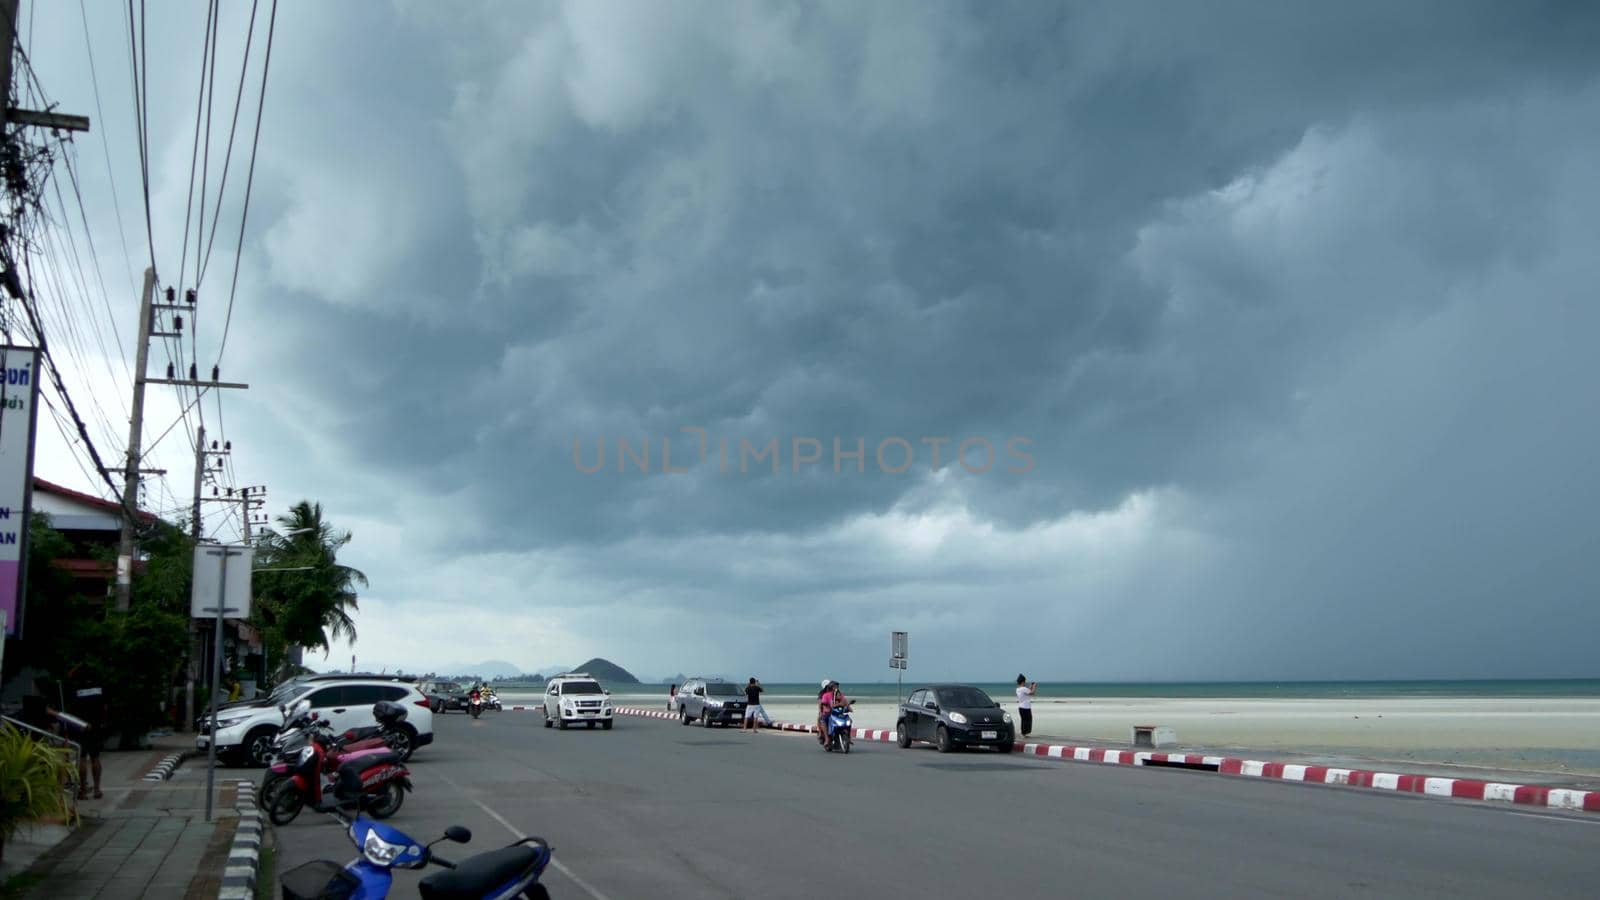 KOH SAMUI ISLAND, THAILAND - 14 JULY 2019 Gloomy landscape of seafront with cars and people awaiting hurricane. Motorbikes riding on asphalt road under amazing heavy clouds in Nathon city. by DogoraSun